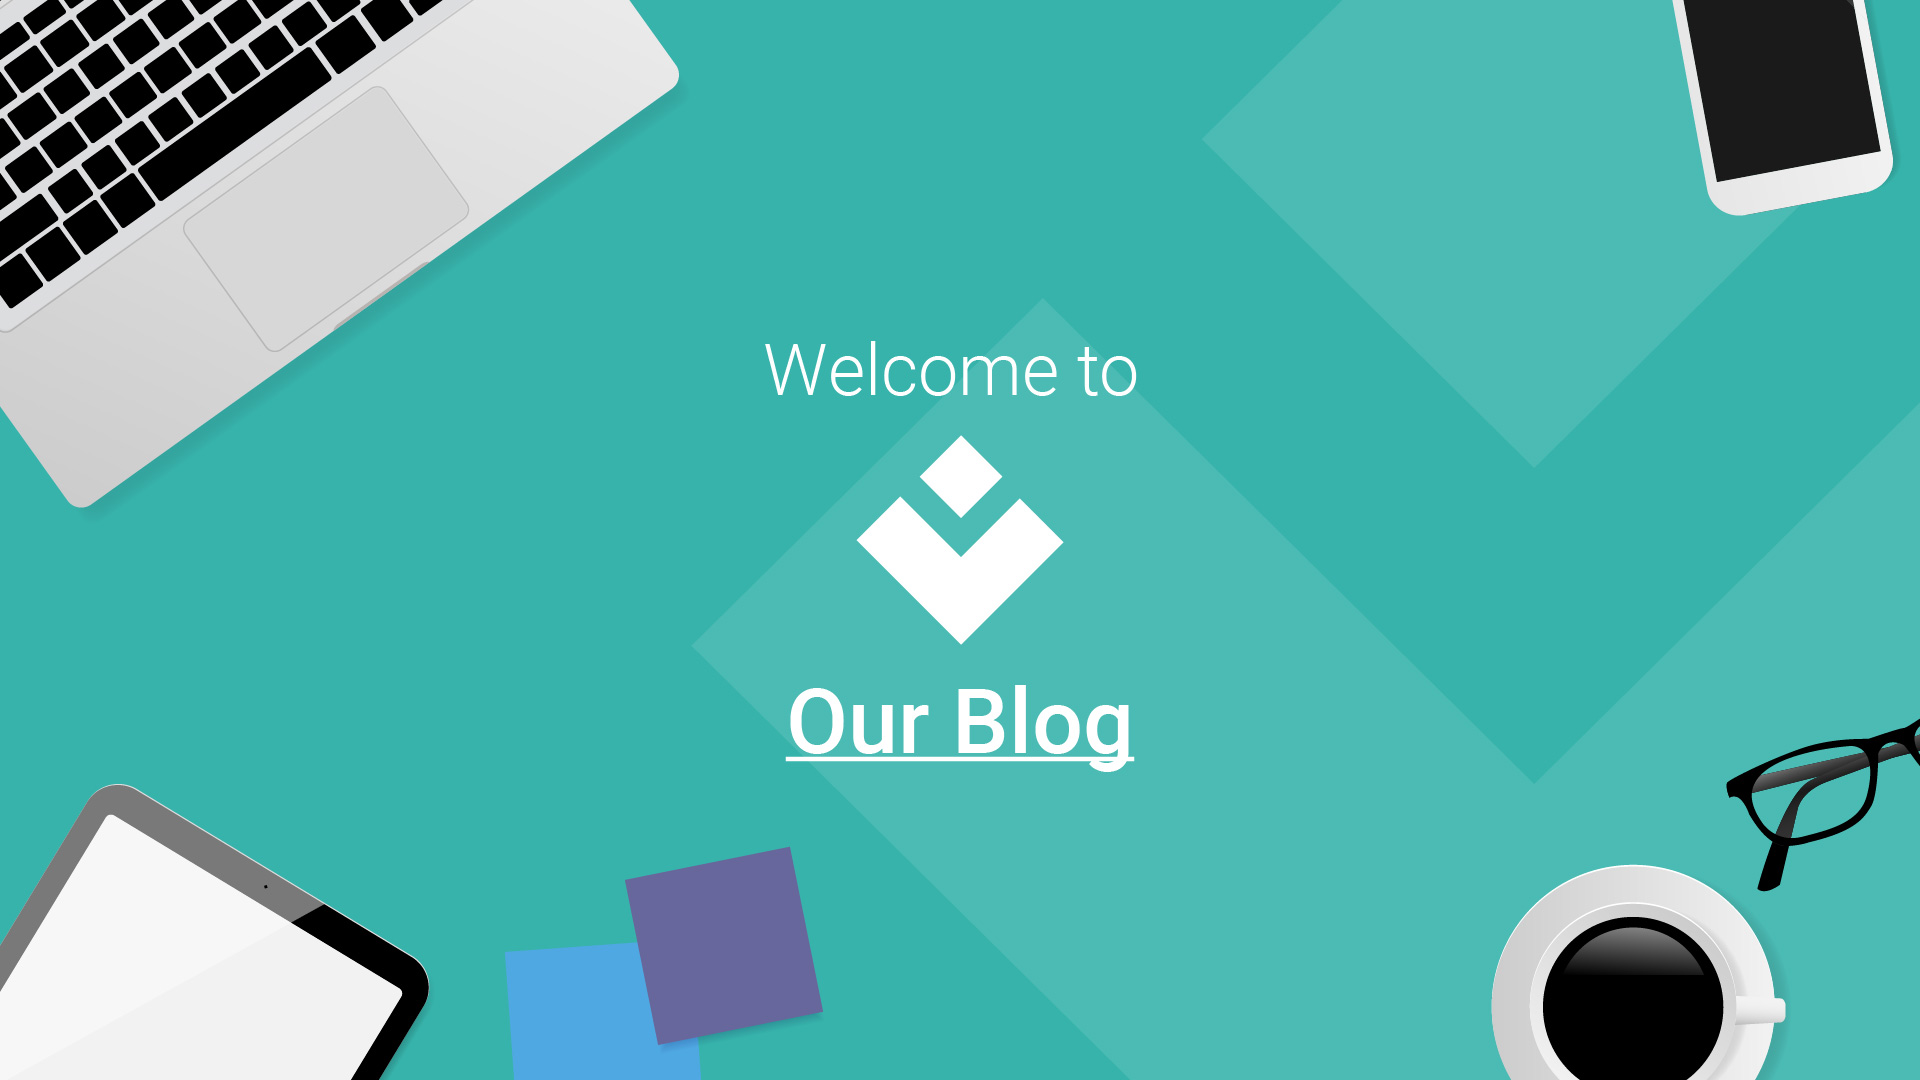 Welcome to Our Blog!